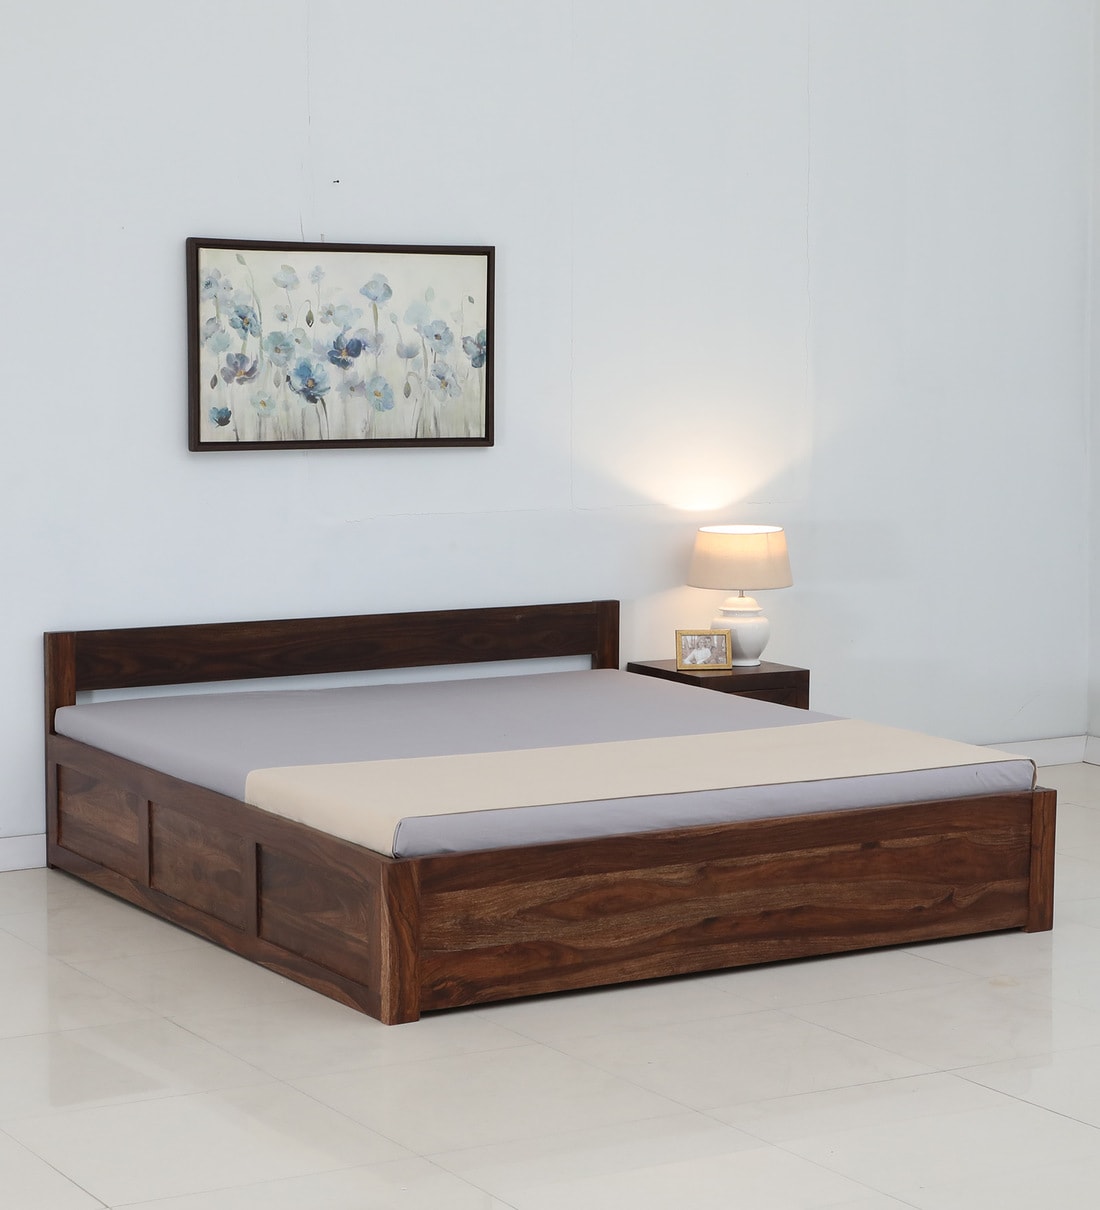 Buy Enkel Sheesham Wood Queen Size Bed In Provincial Teak Finish With Box Storage At 13 Off By 4426